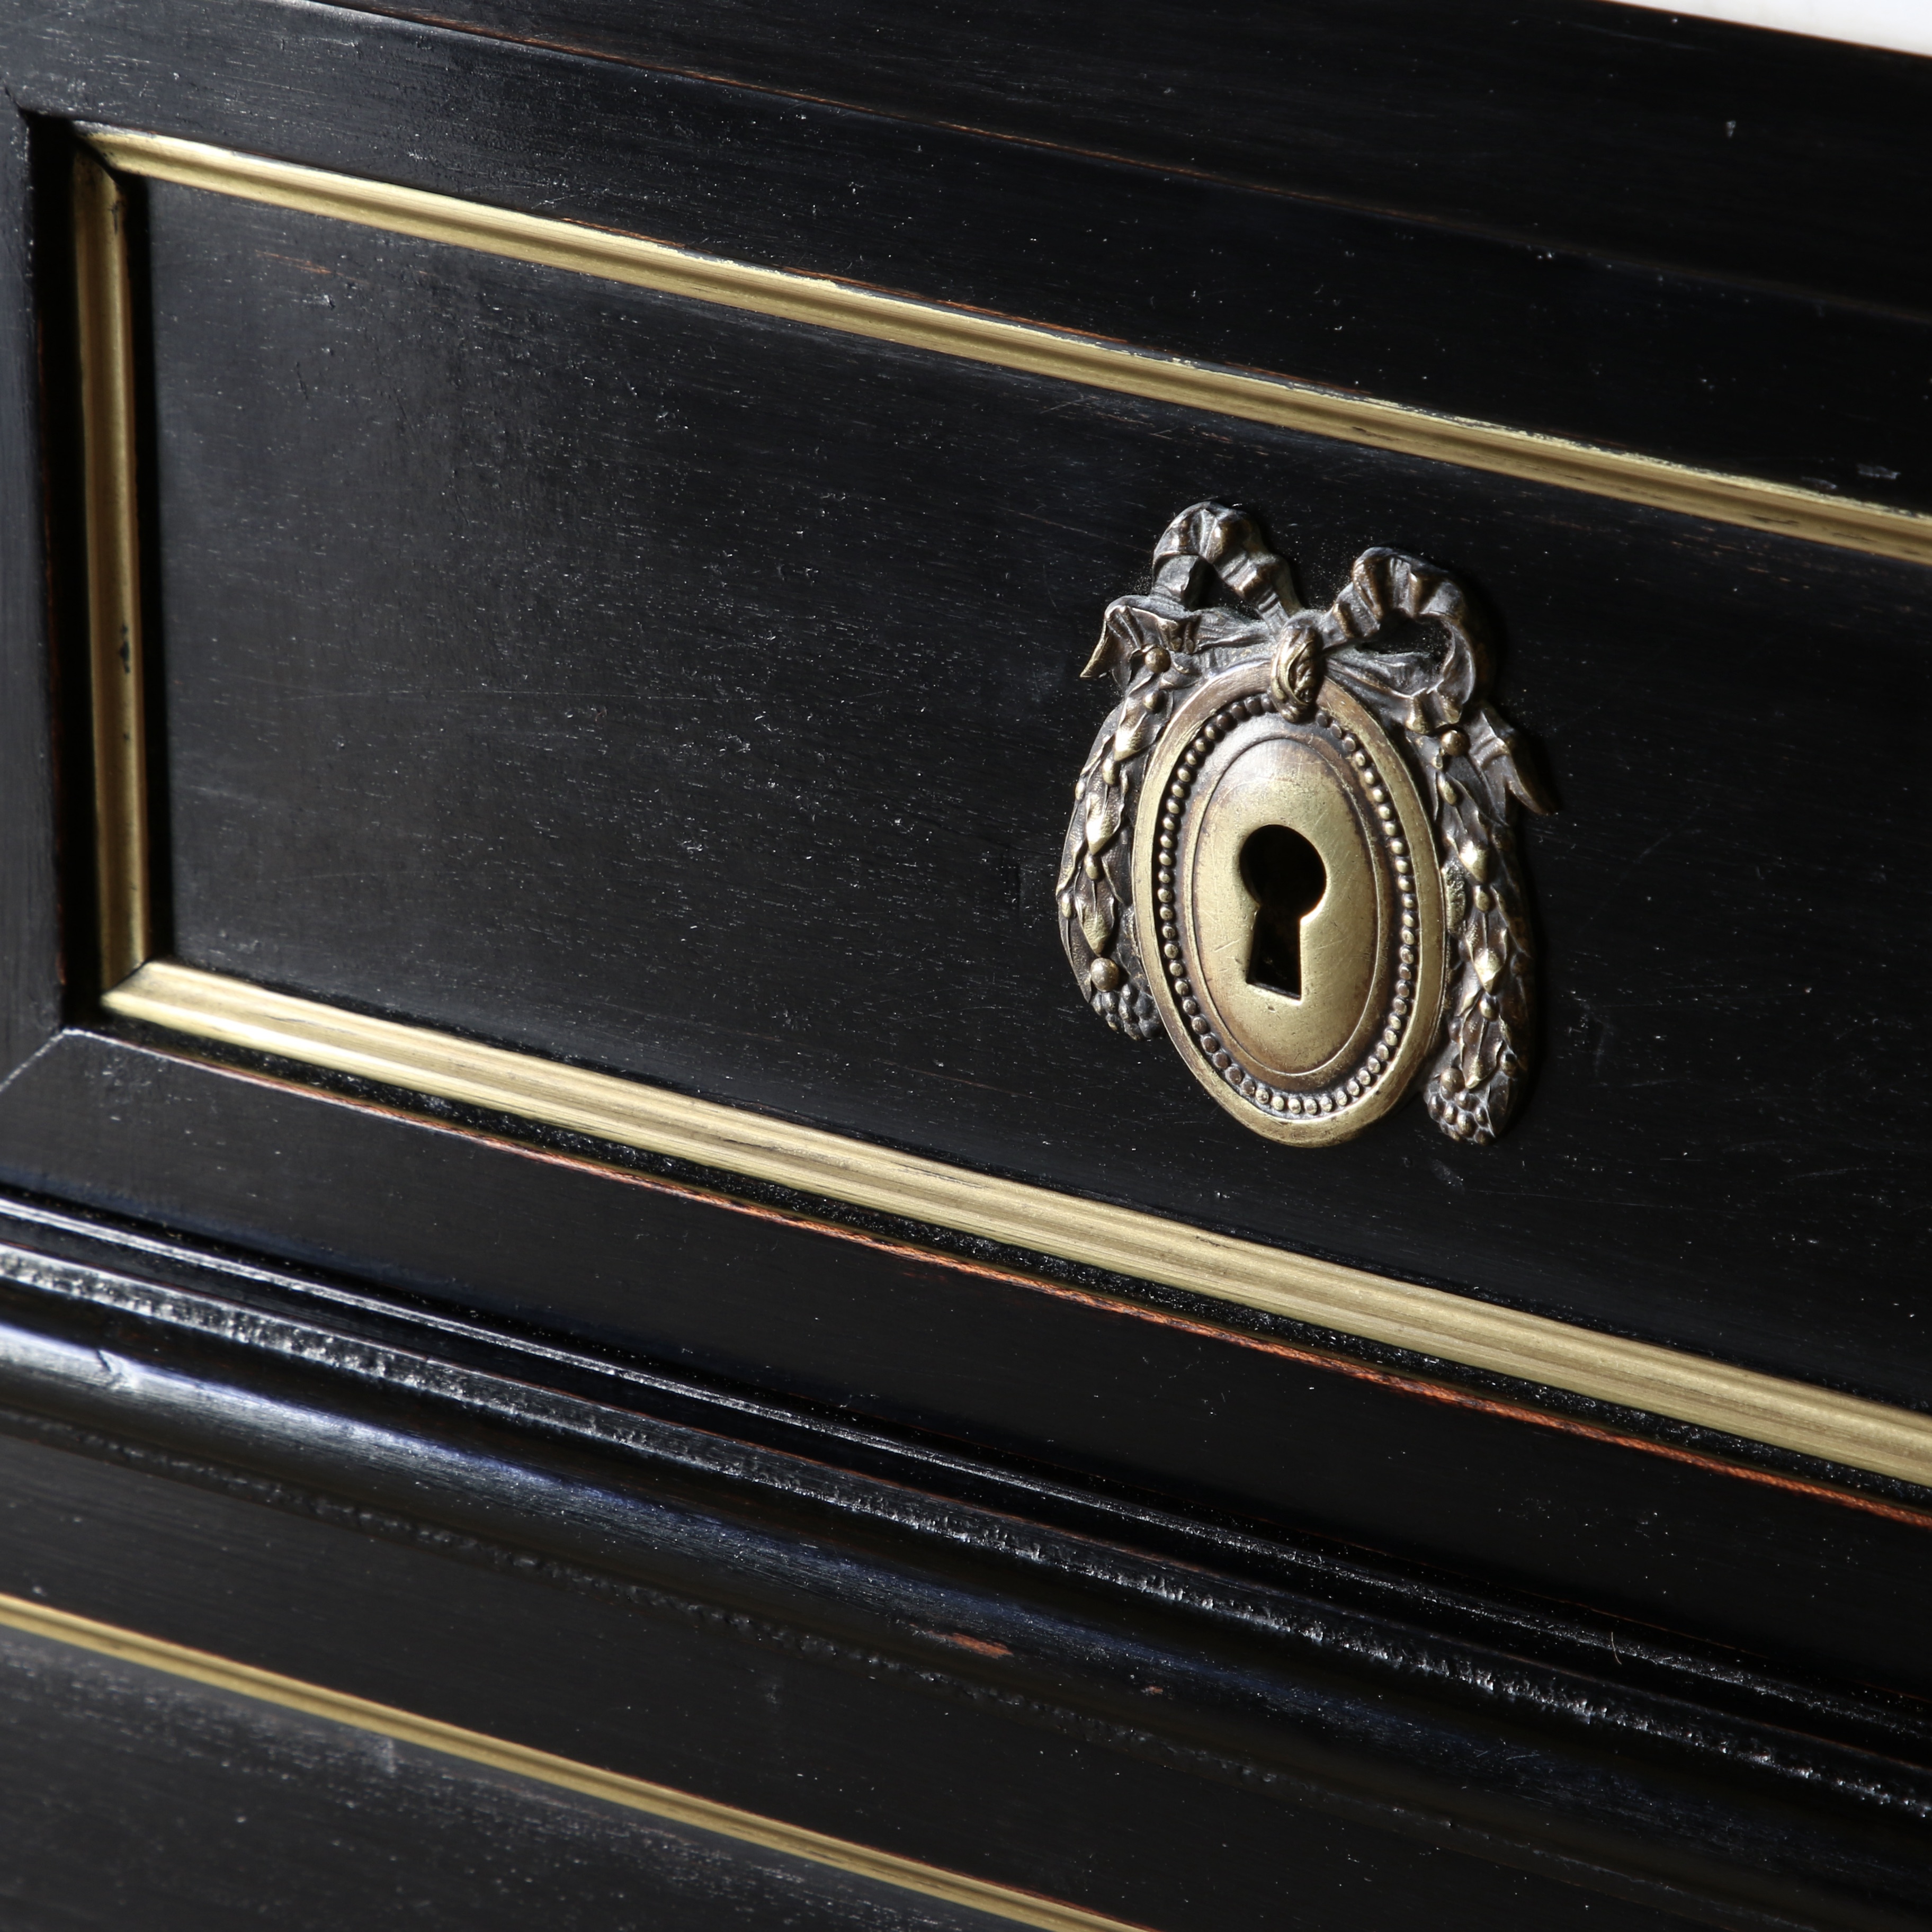 Louis XVI Chest of Drawers